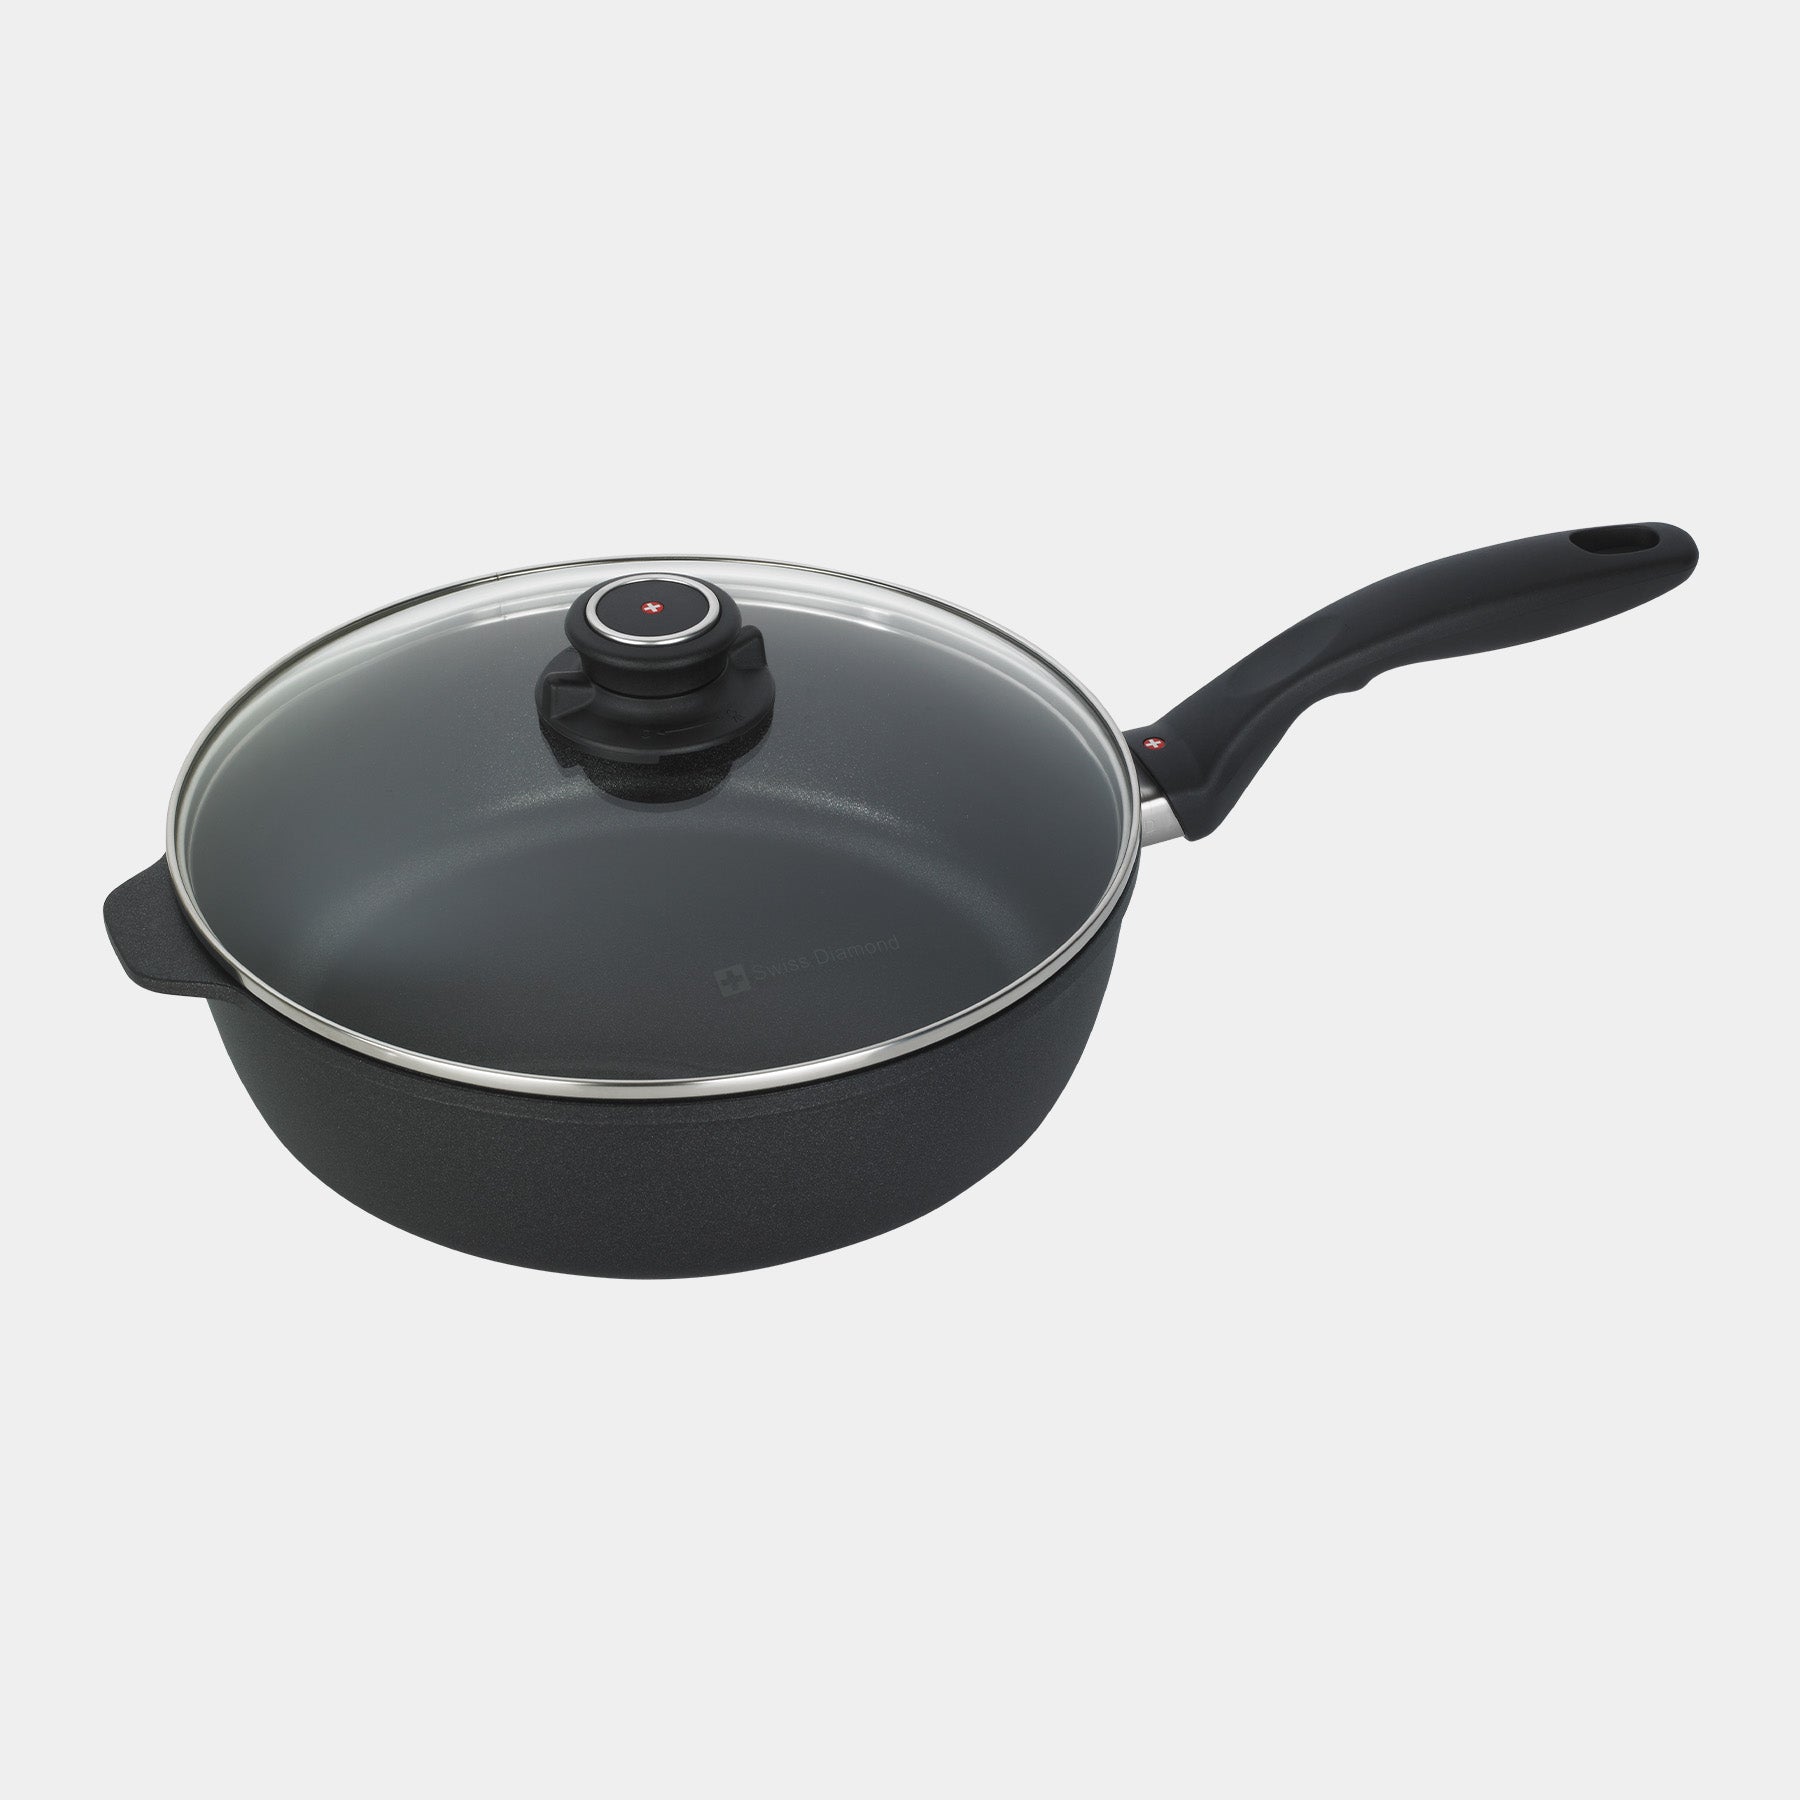 XD Nonstick 3.8 qt Saute Pan with Glass Lid - Induction